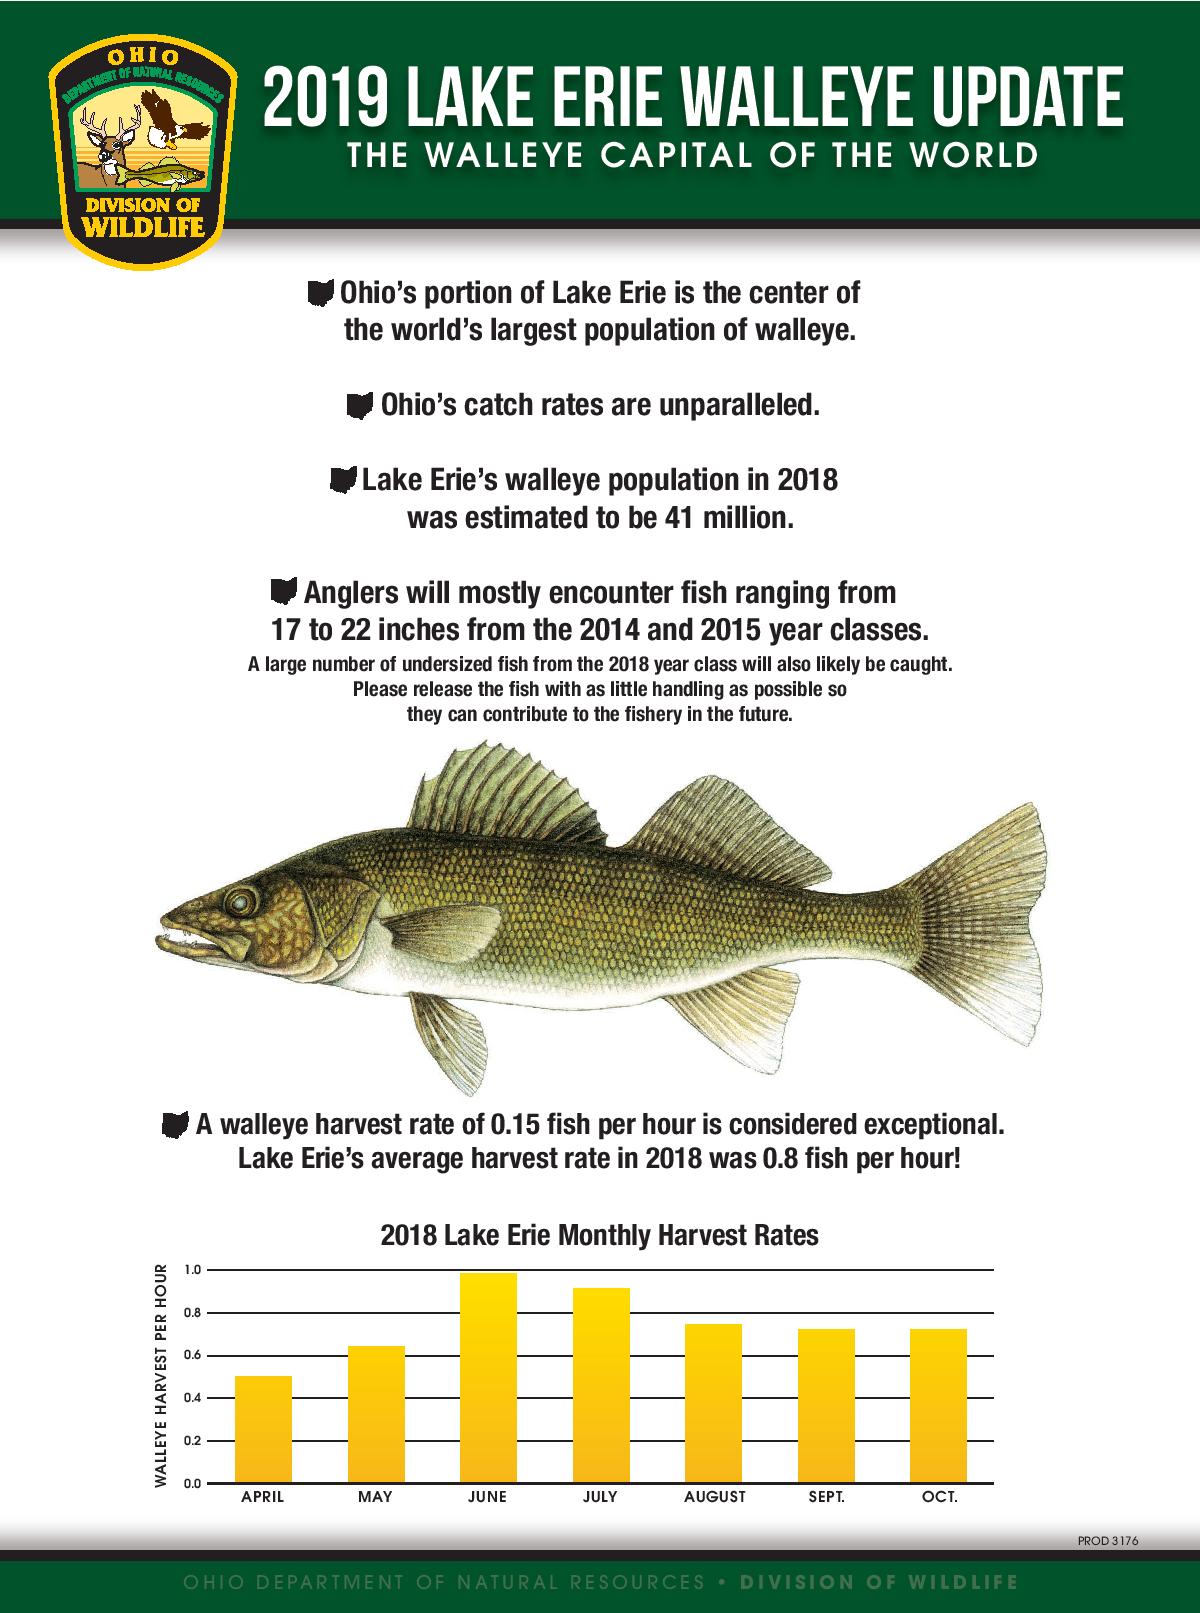 Infographic showing the 2019 Lake Erie Walleye field guide according to the Ohio Department of Natural Resources Division of Wildlife